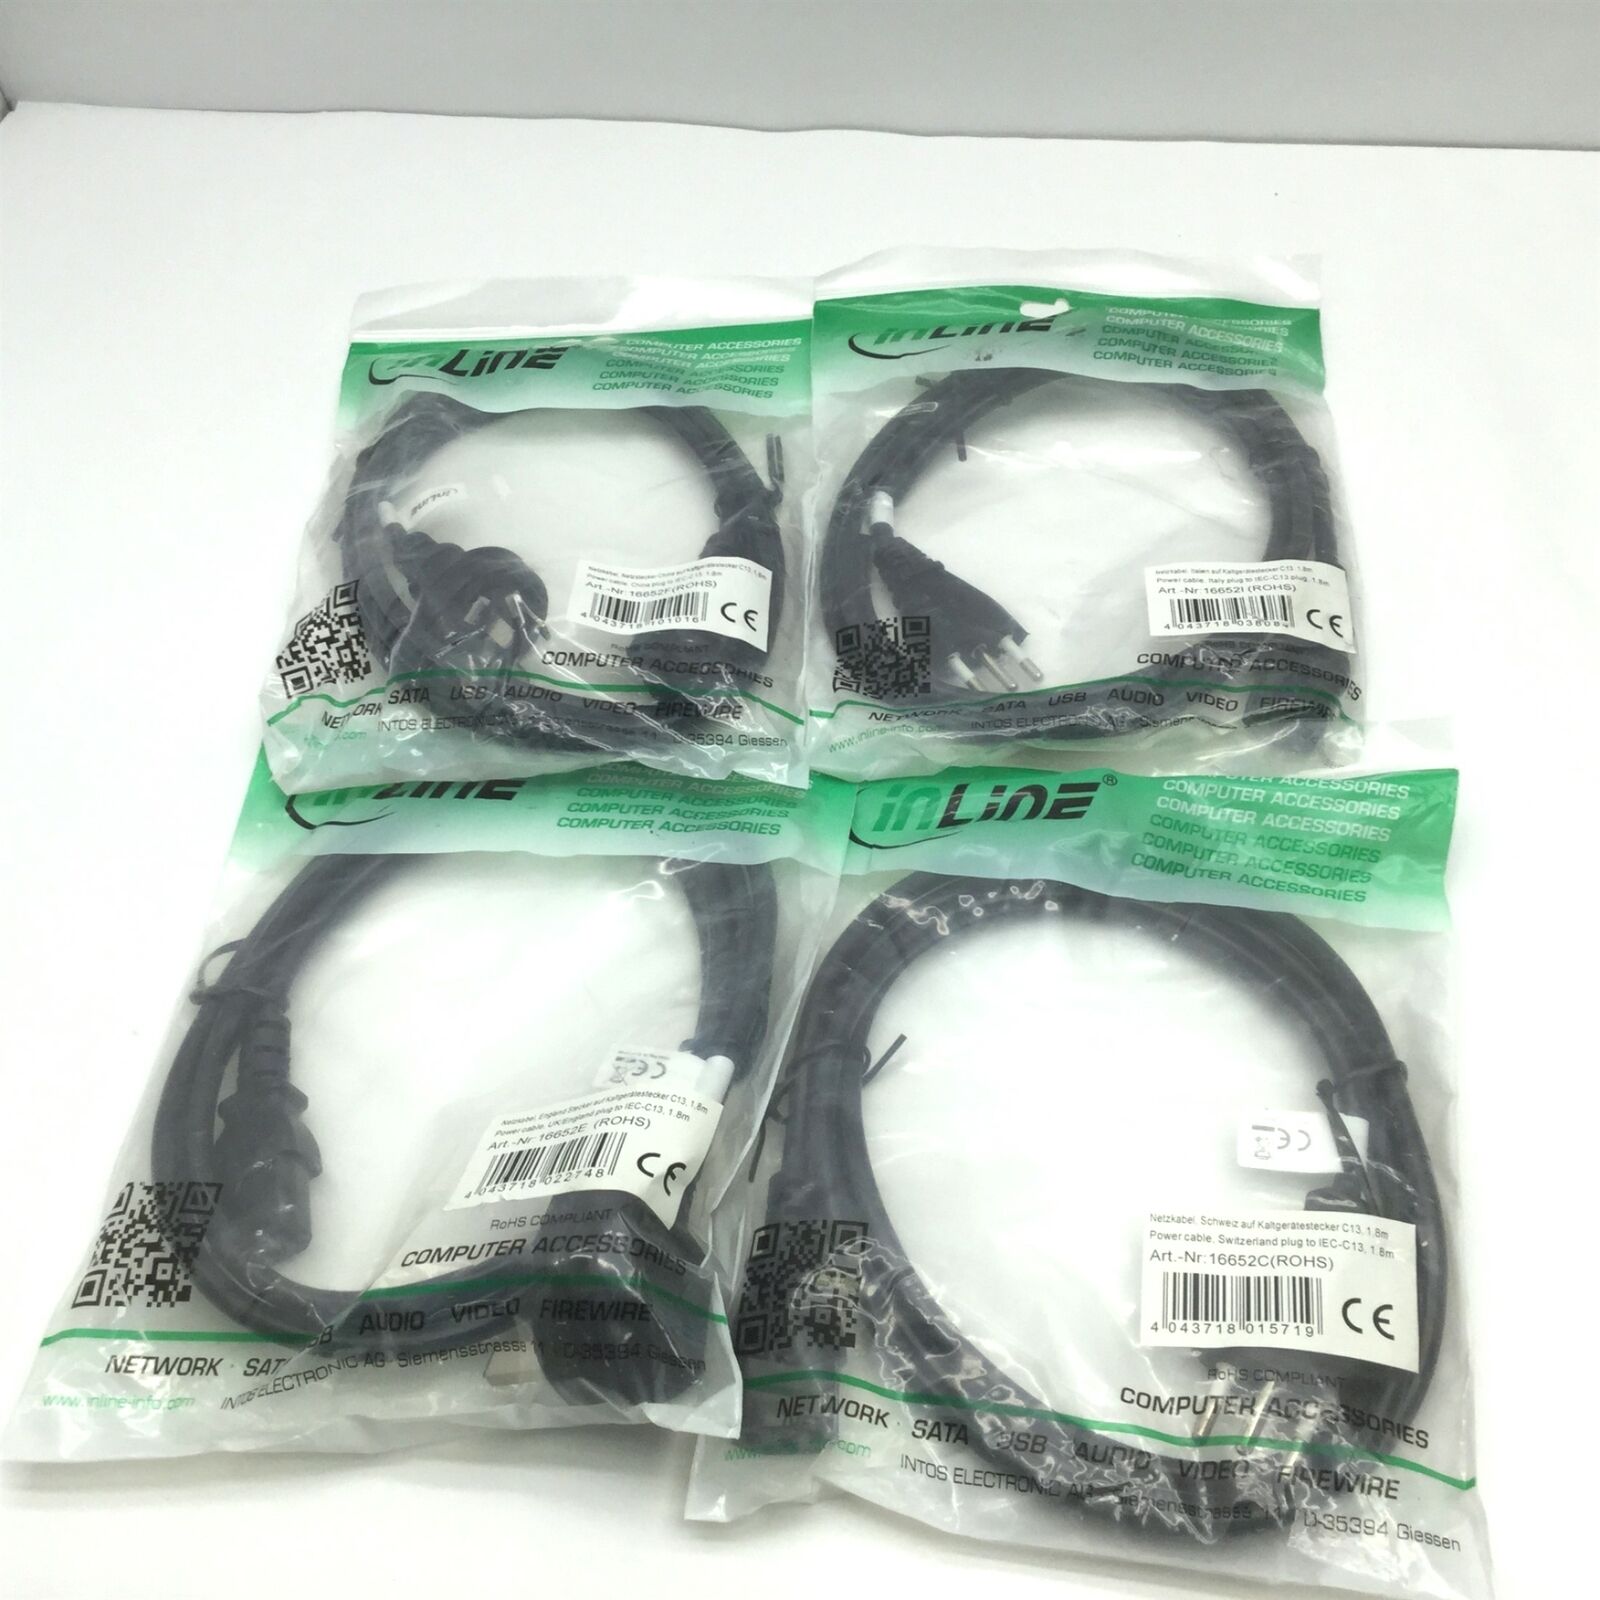 Lot of New inLine Power Computer Power Cables for China, UK, Switzerland & Italy